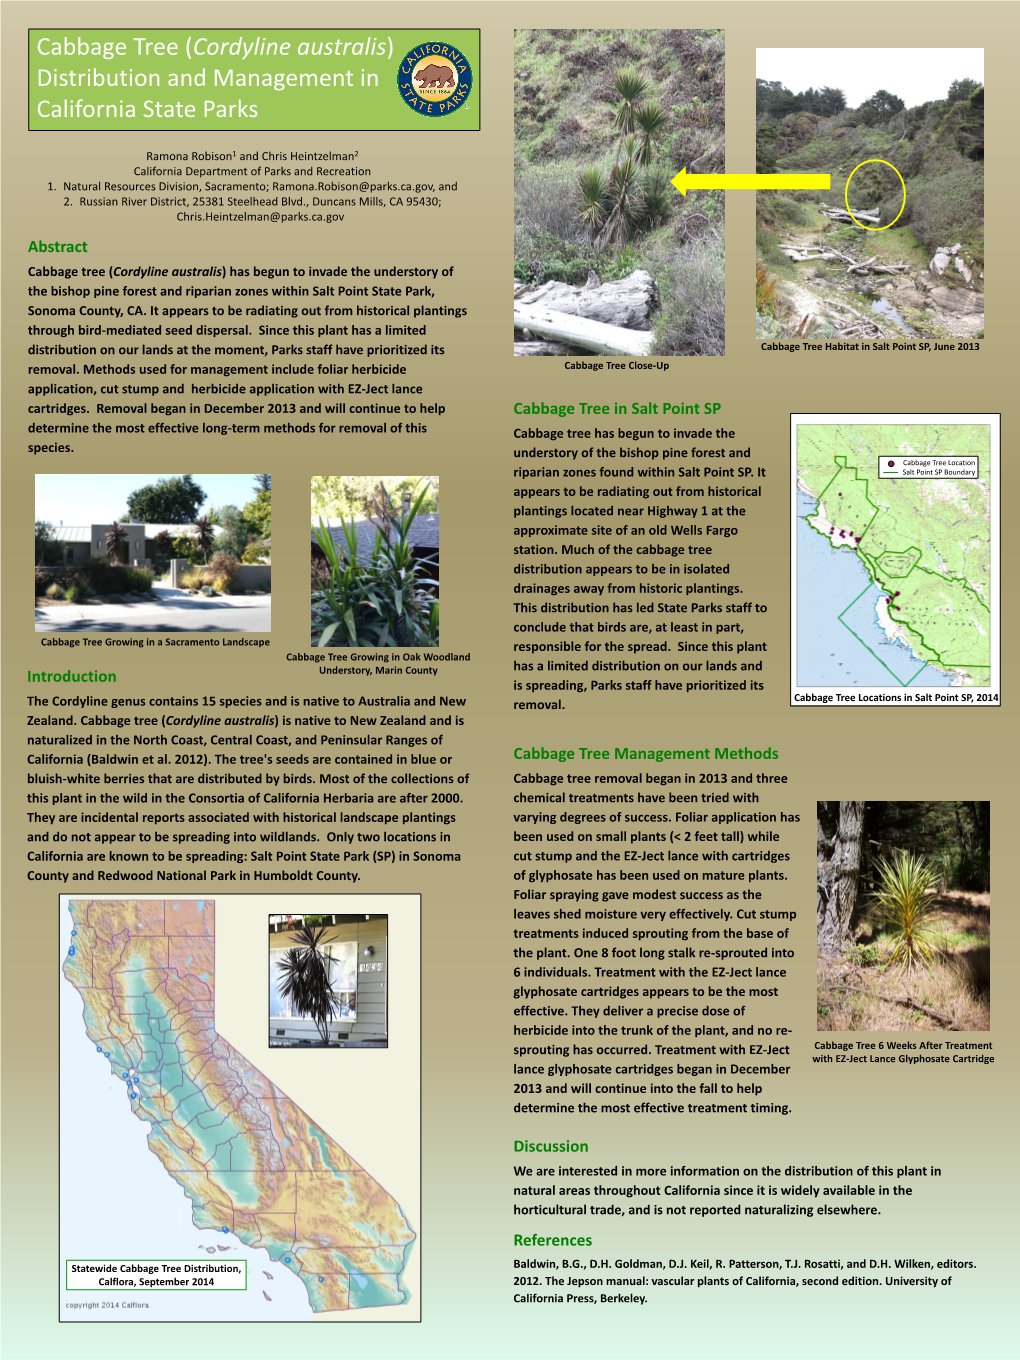 Cabbage Tree (Cordyline Australis) Distribution and Management in California State Parks